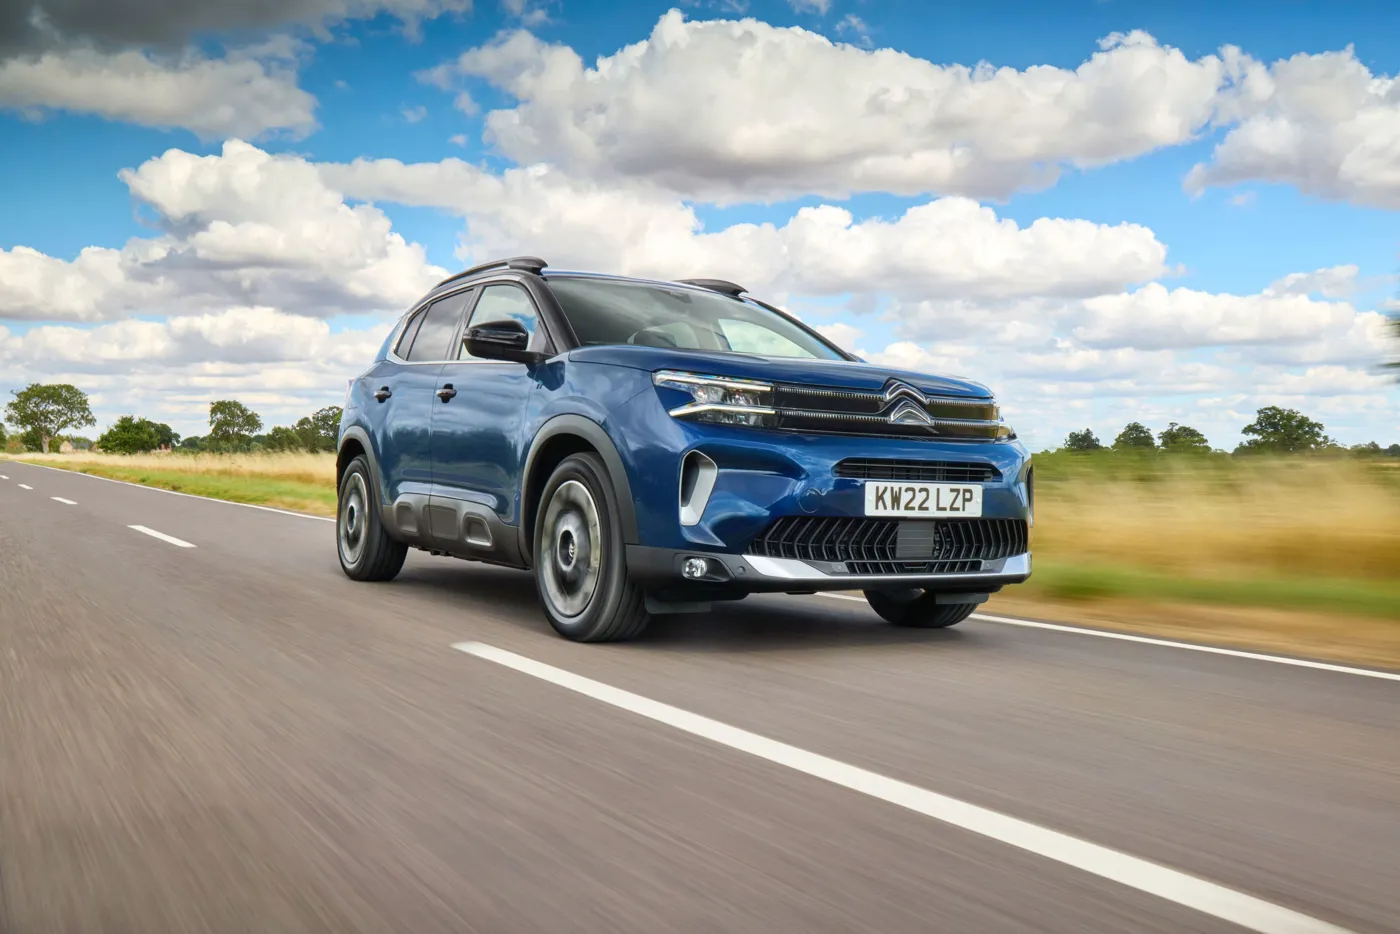 Citroen C5 Aircross review  low on price, high on comfort